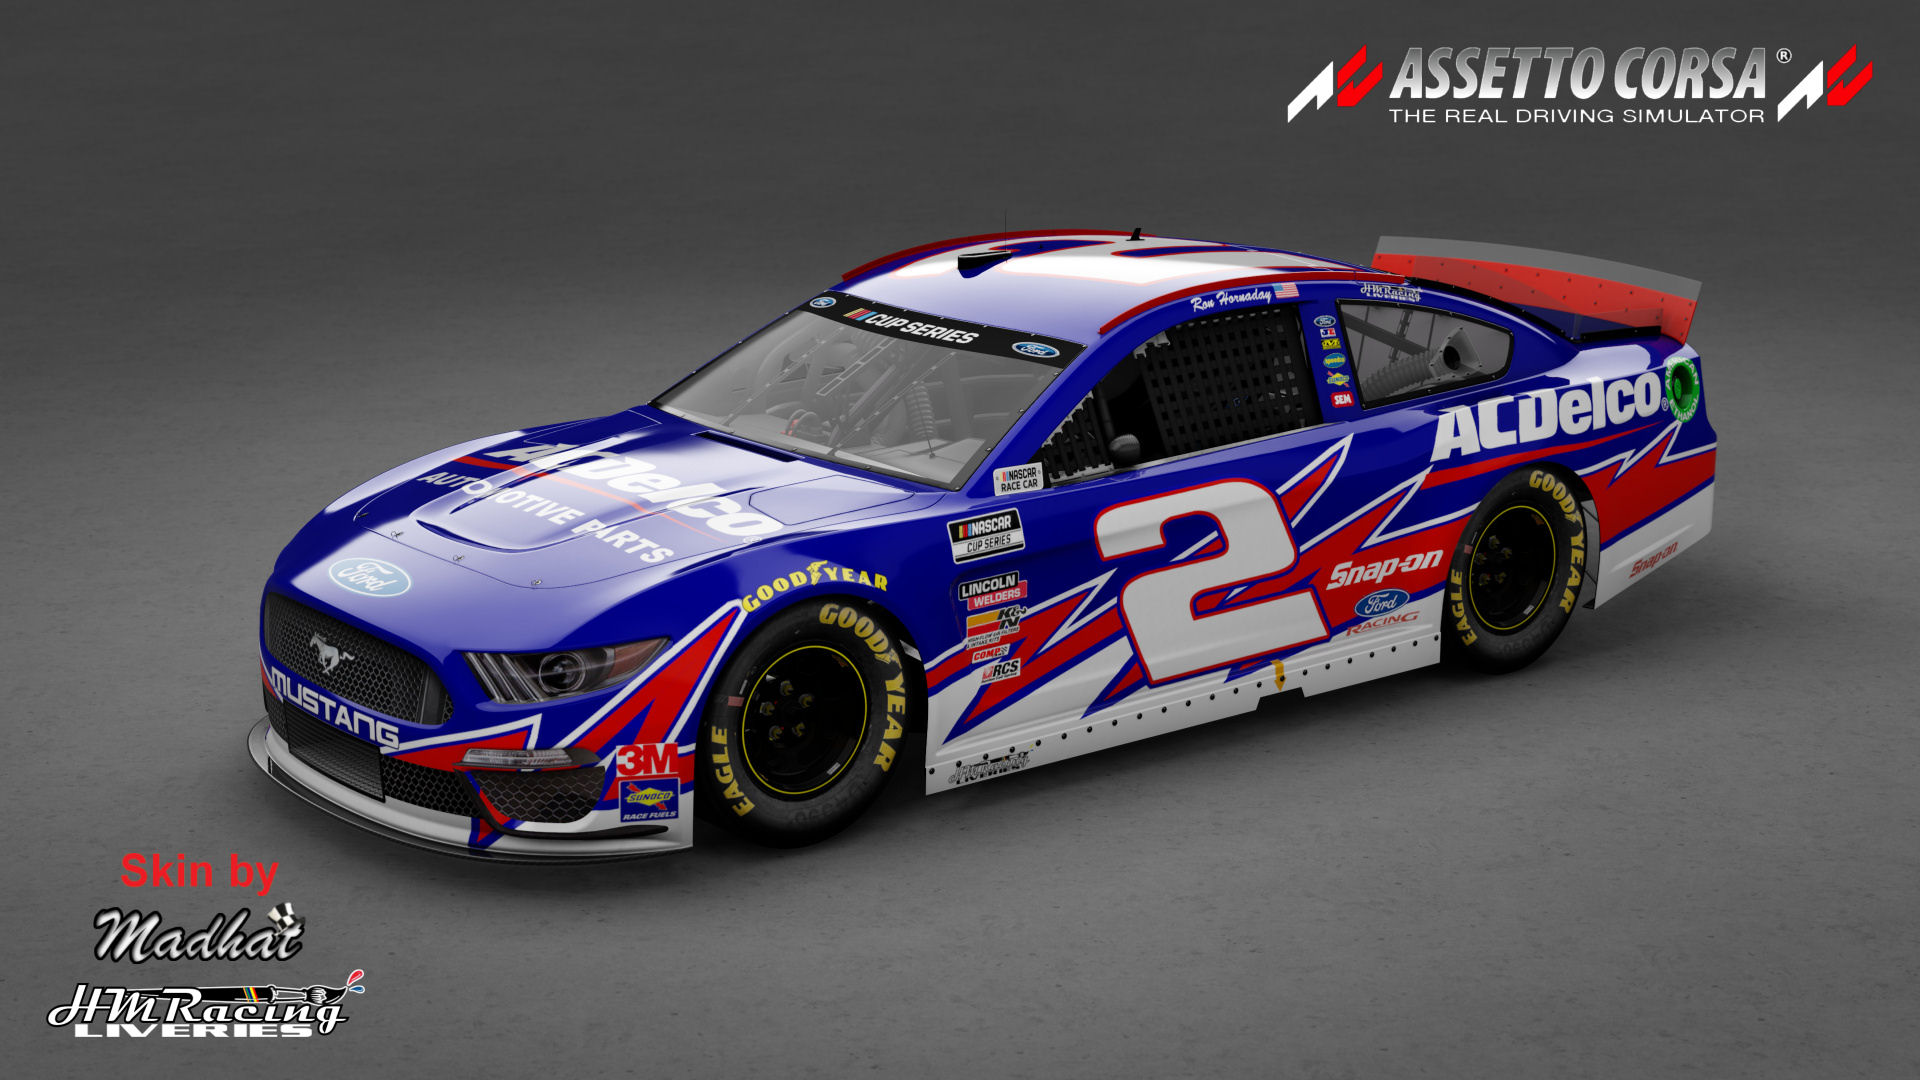 Ron Hornaday No2 ACDelco Mustang Nascar by Madhat HMRacing Liveries 02.jpg